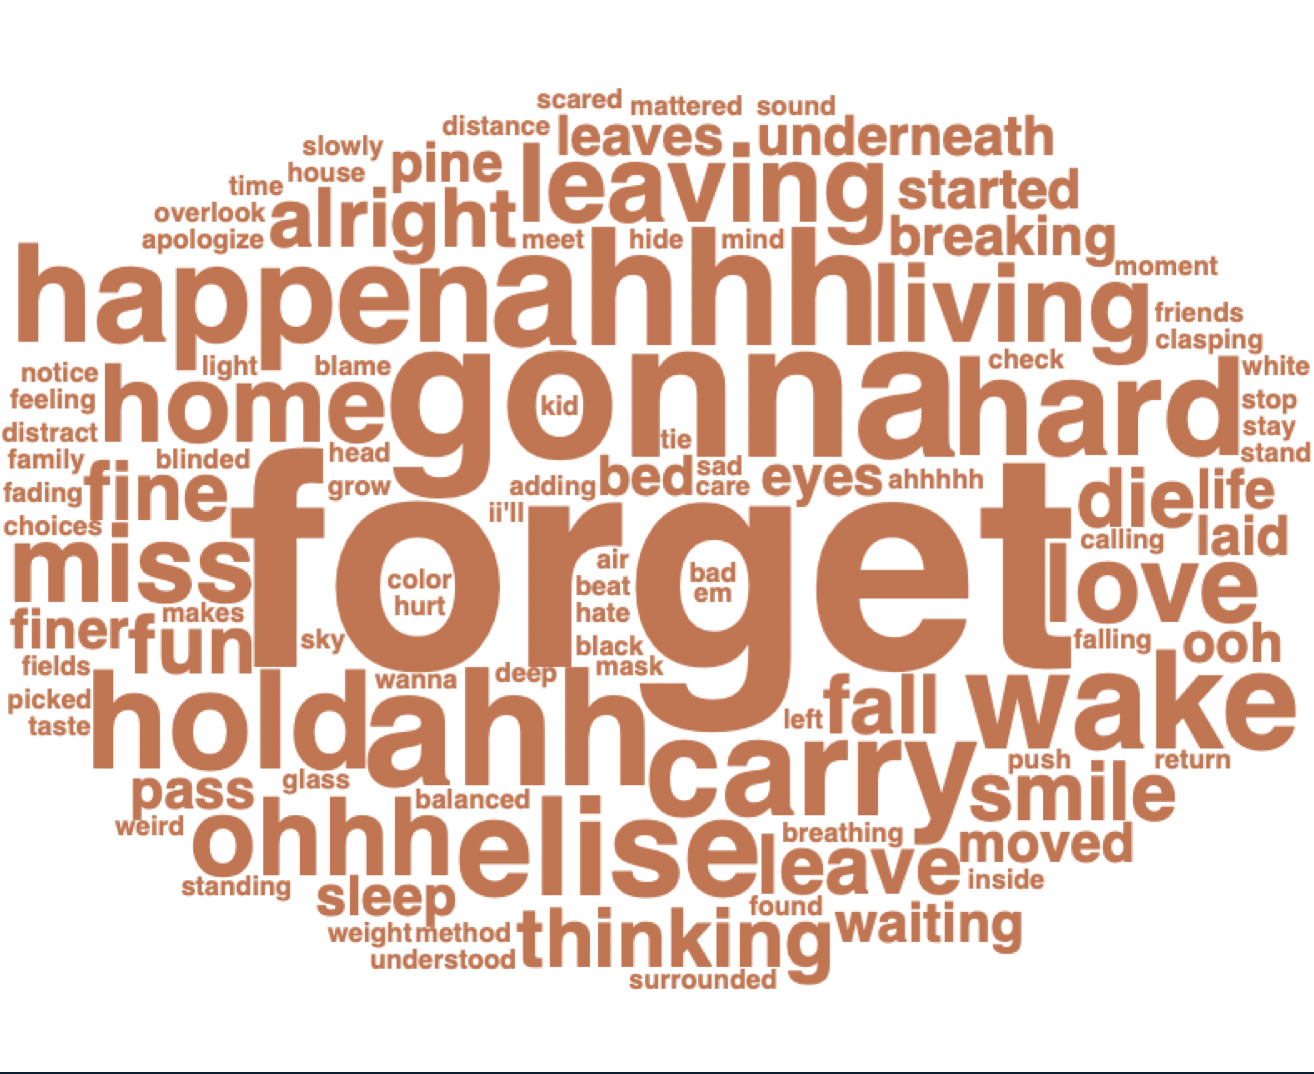 Top Words for Underneath The Pine (2011) word cloud